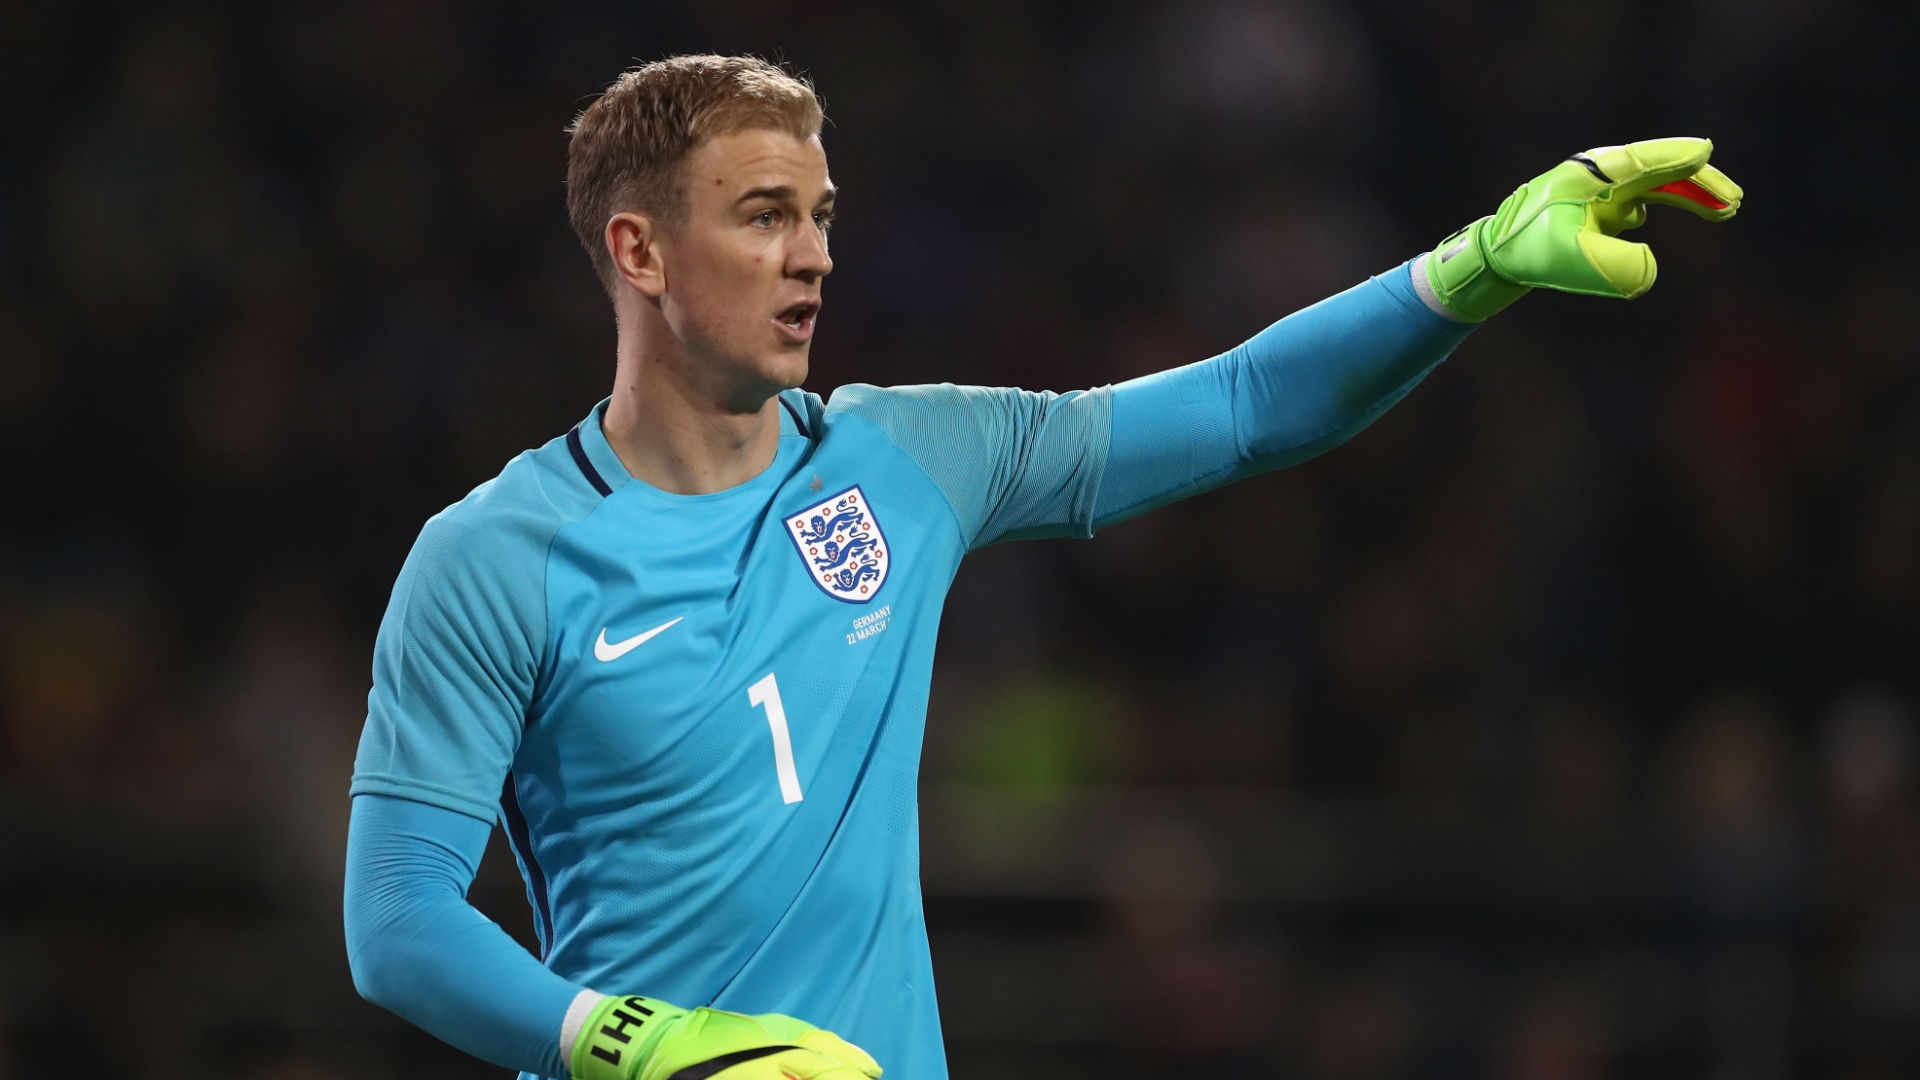 Noble goes on to say that the team would benefit from more competition in the goalkeeper position, but that things remain to be made clear about whether Hart is to join West Ham.